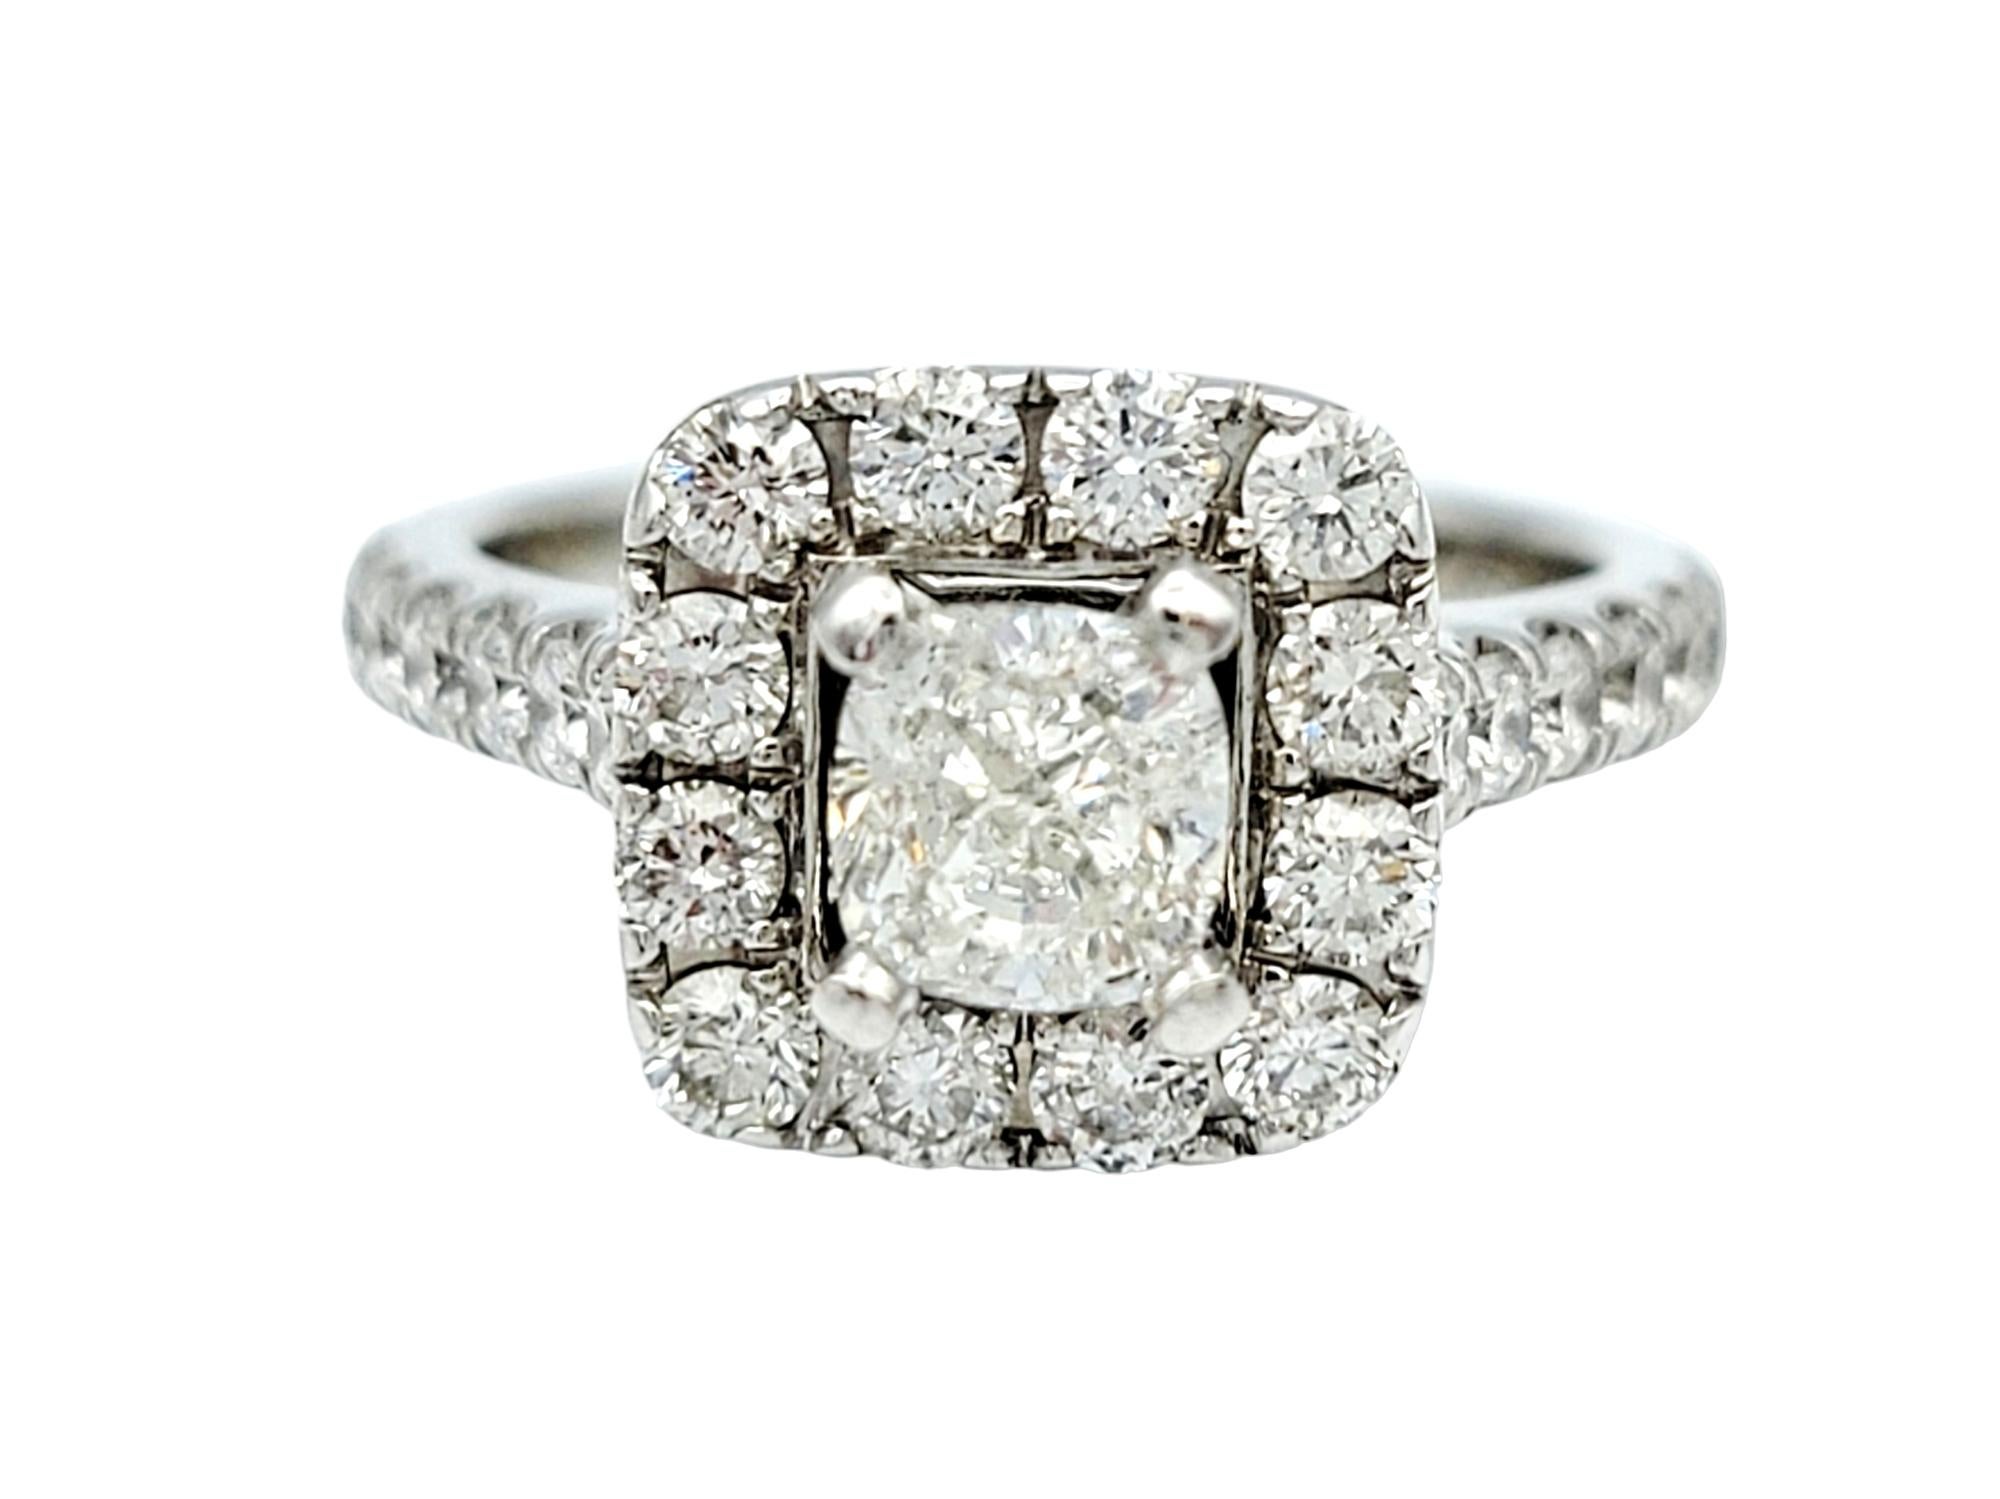 Ring size 4.75

This gorgeous Neil Lane engagement ring is a breathtaking masterpiece that encapsulates the essence of timeless romance and luxurious sophistication. At its heart, a dazzling cushion-cut diamond takes center stage, radiating with